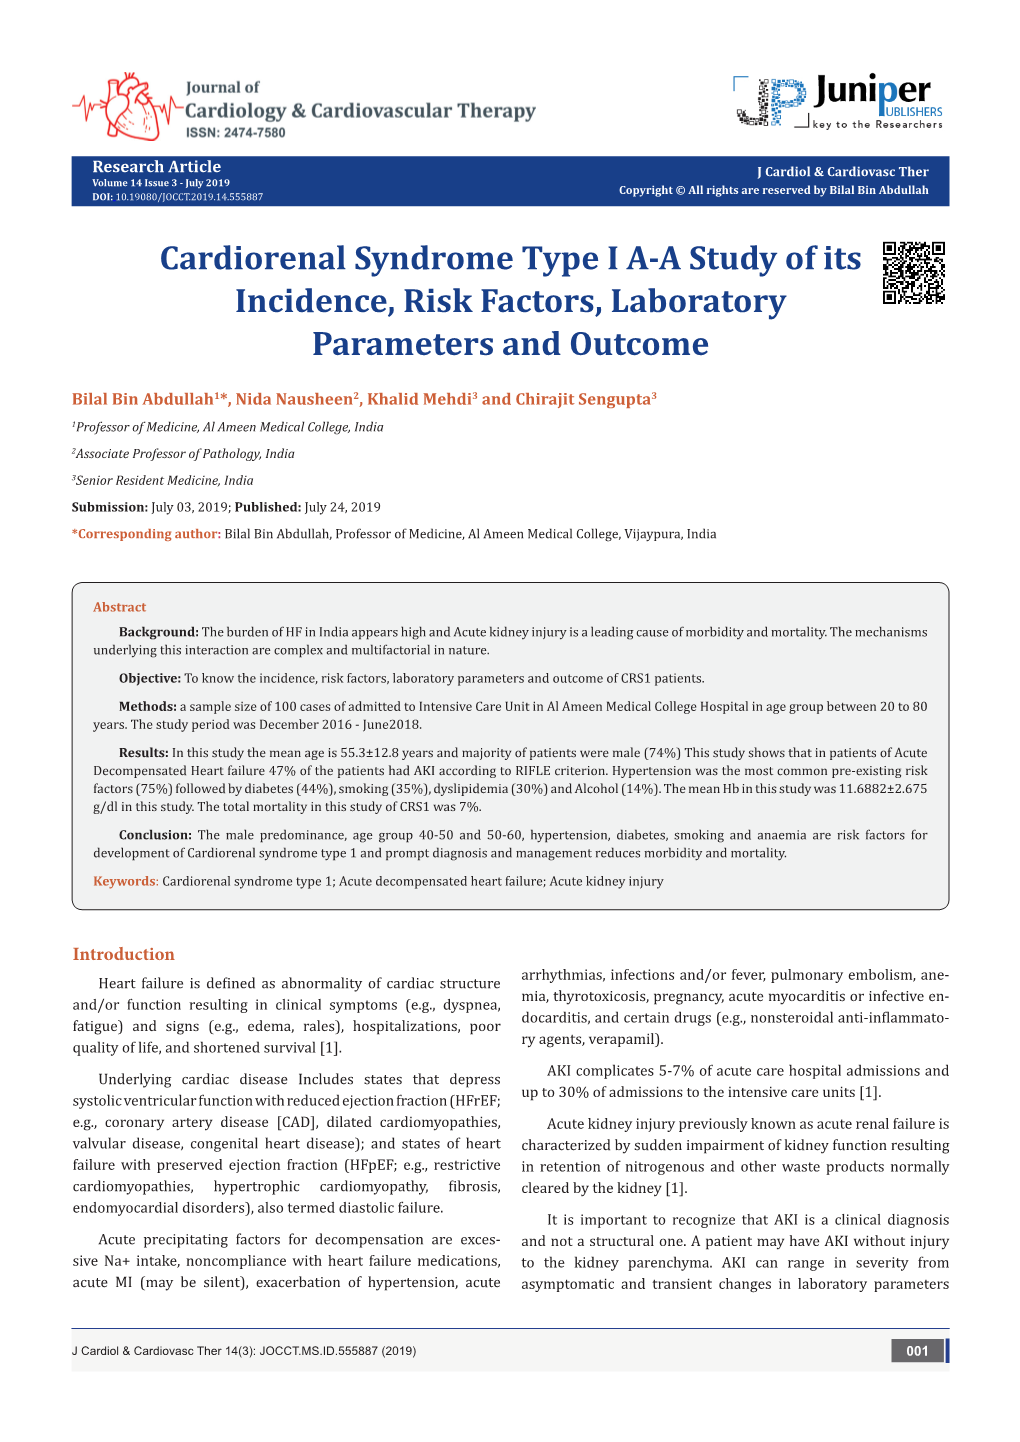 Cardiorenal Syndrome Type I A-A Study of Its Incidence, Risk Factors, Laboratory Parameters and Outcome